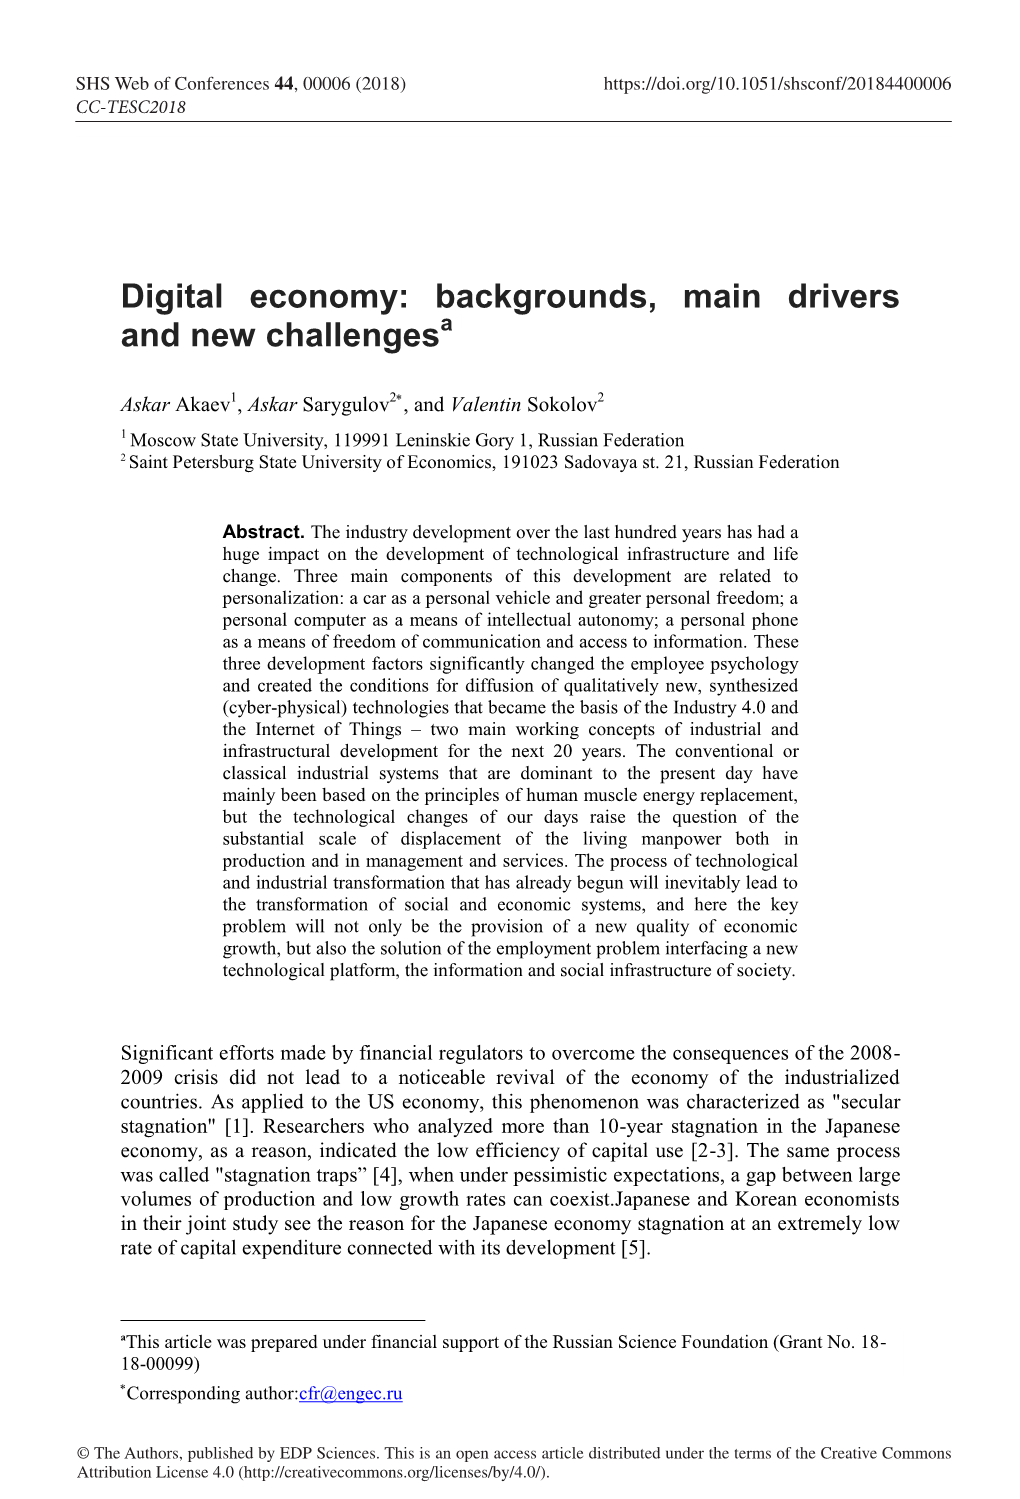 Digital Economy: Backgrounds, Main Drivers and New Challengesa1